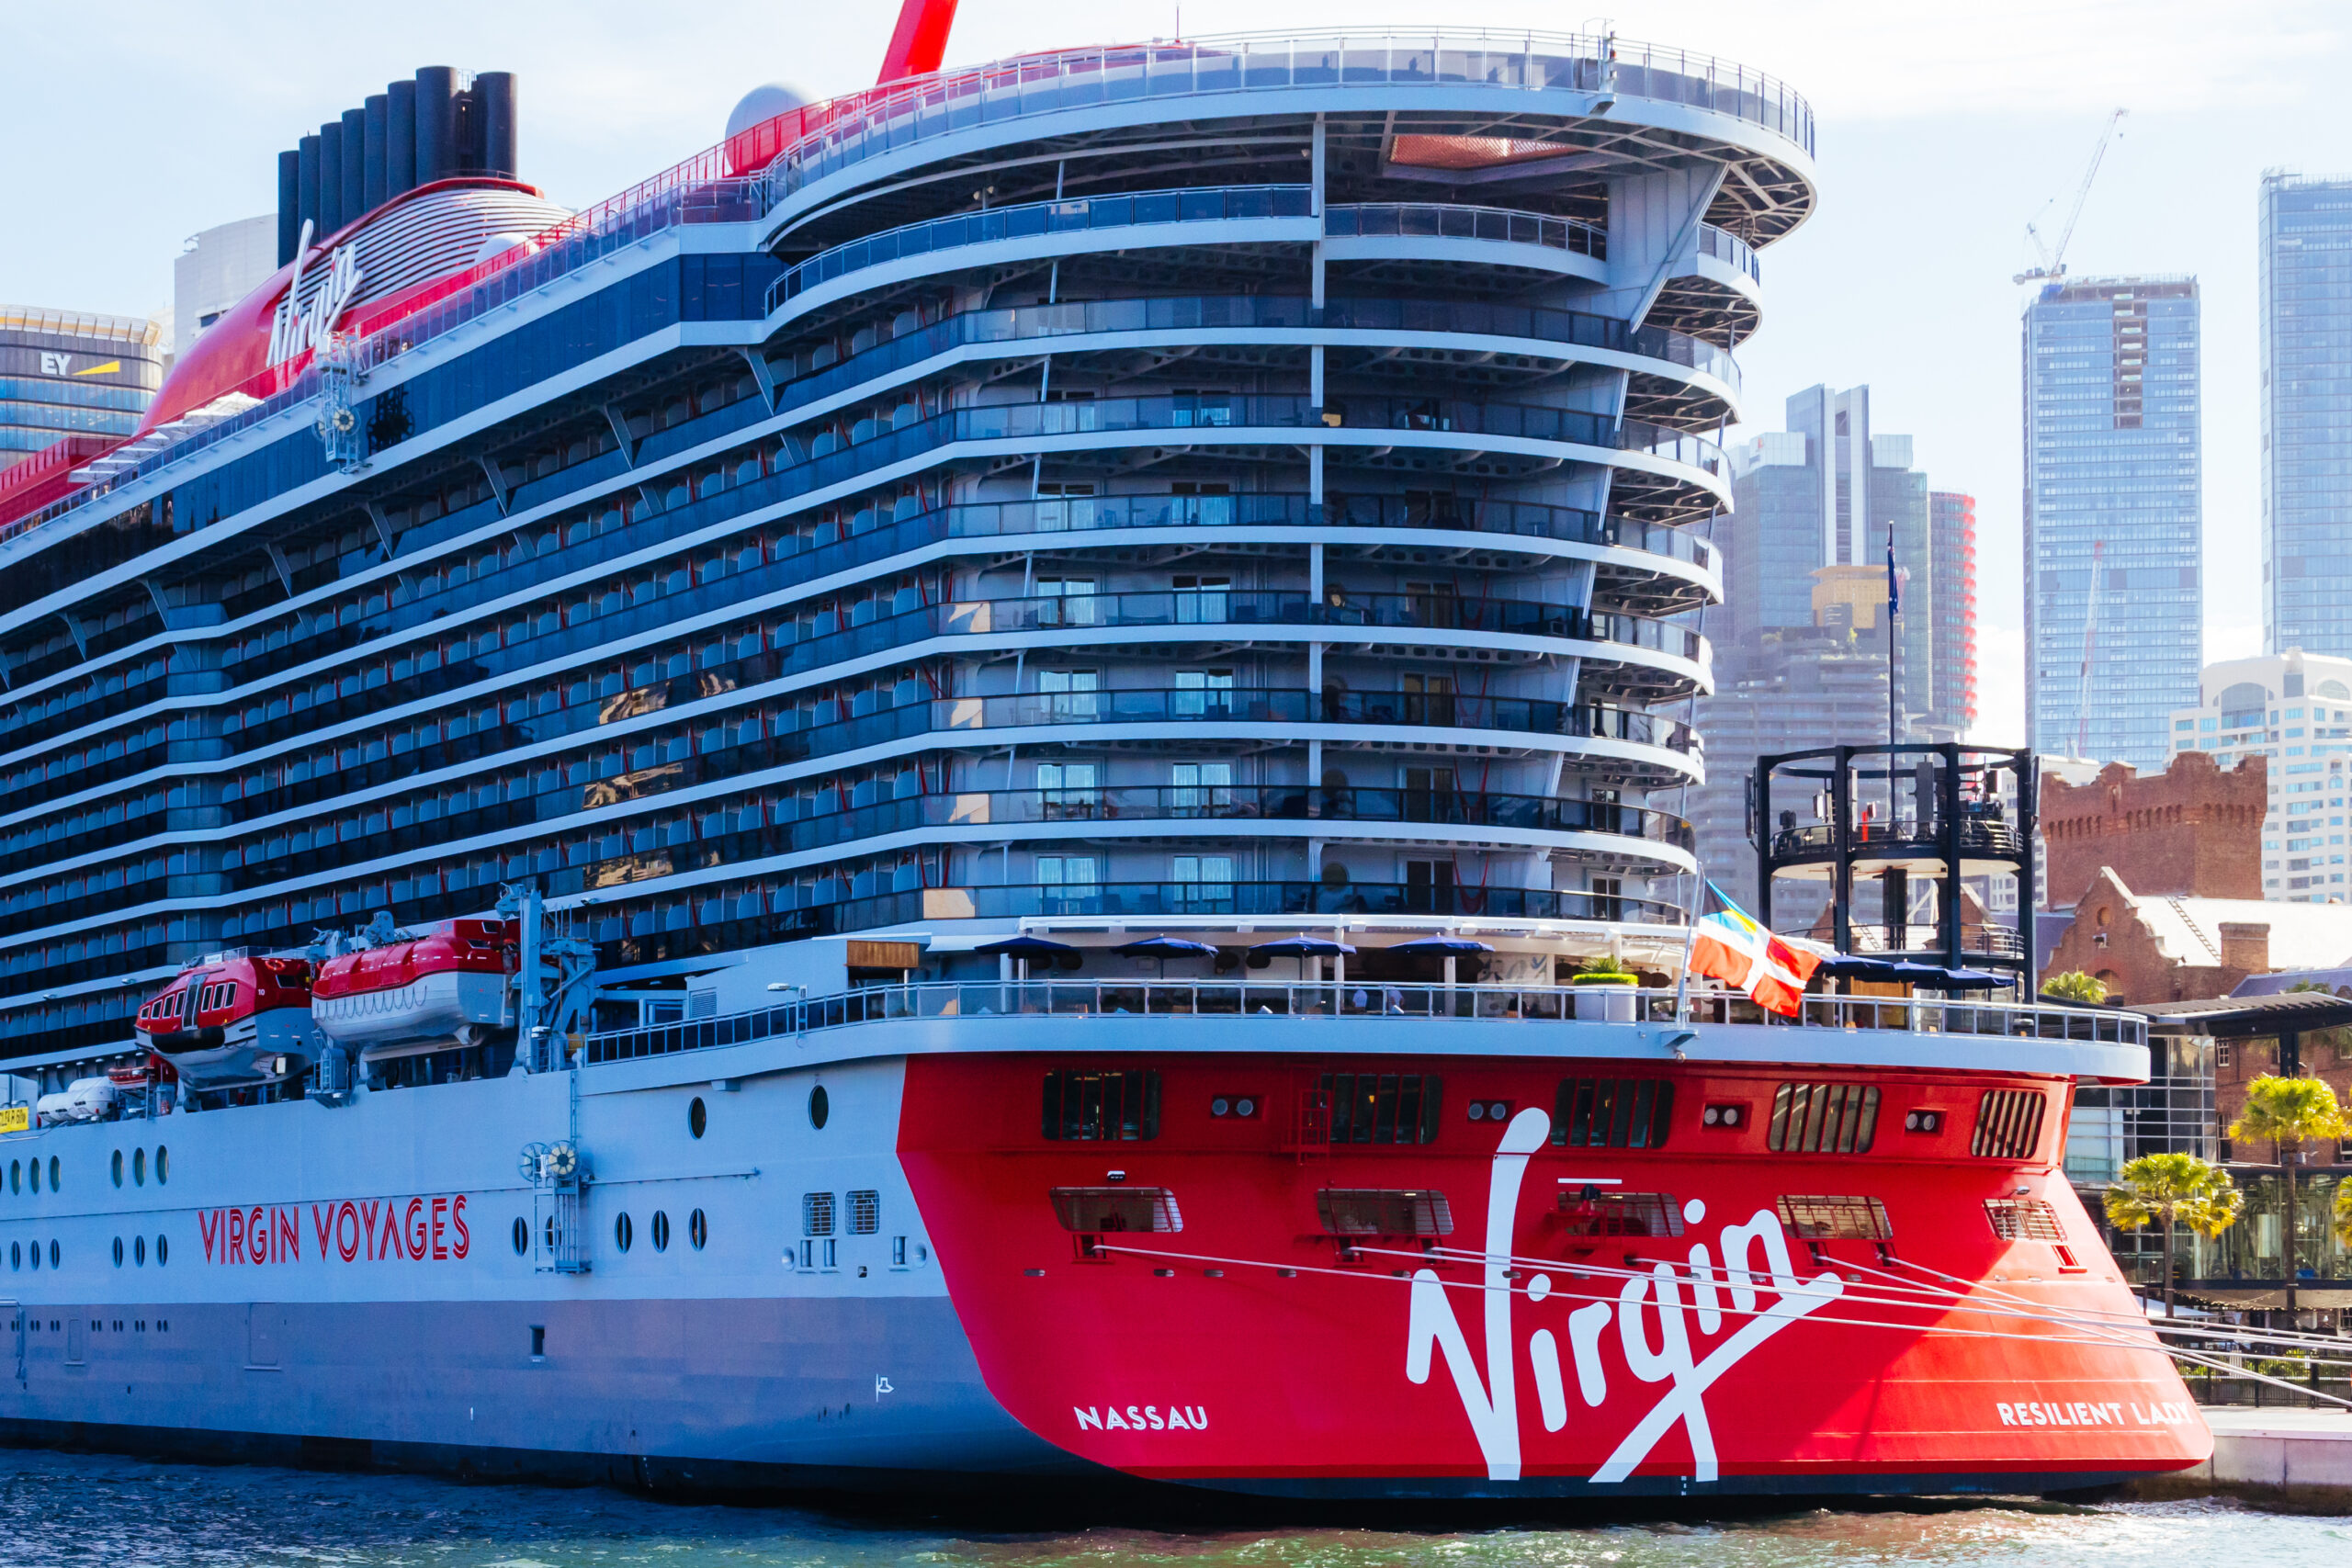 An Amazing Adult Cruise on Virgin Voyages - Virgin Voyages Cruise Ship